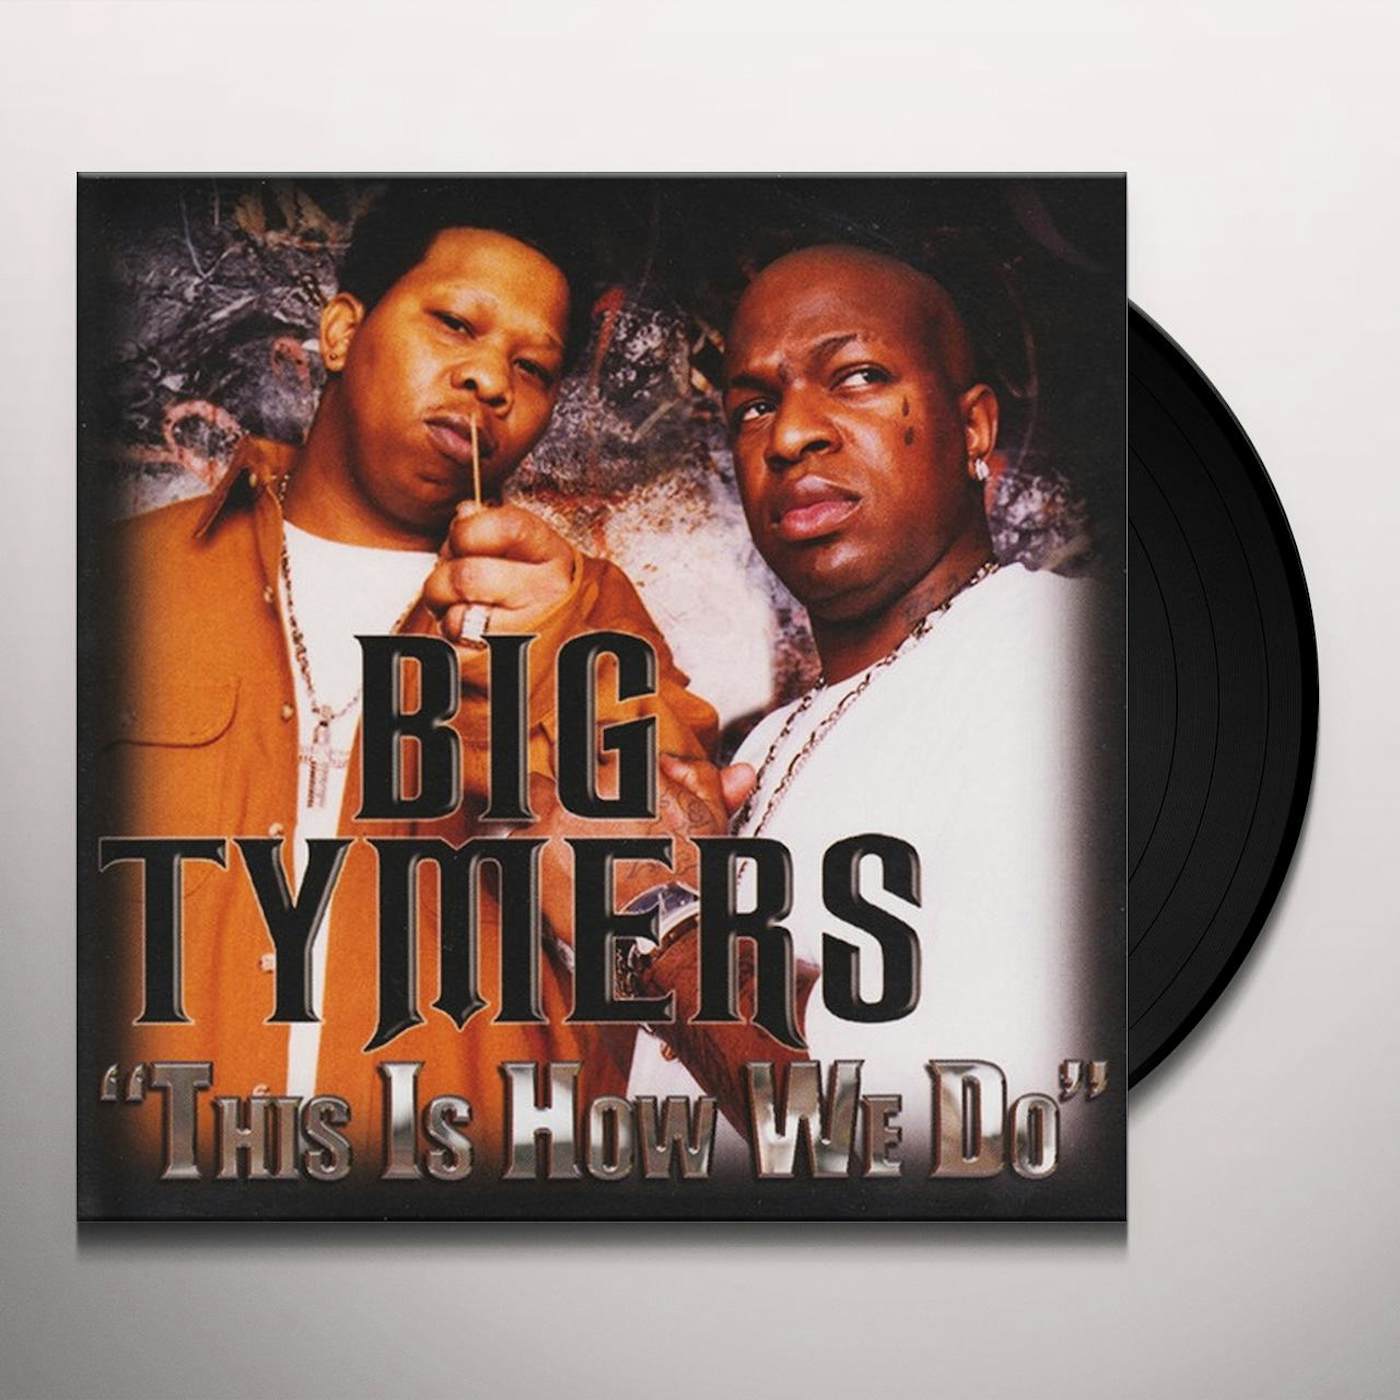 Big Tymers THIS IS HOW WE DO (X5) Vinyl Record